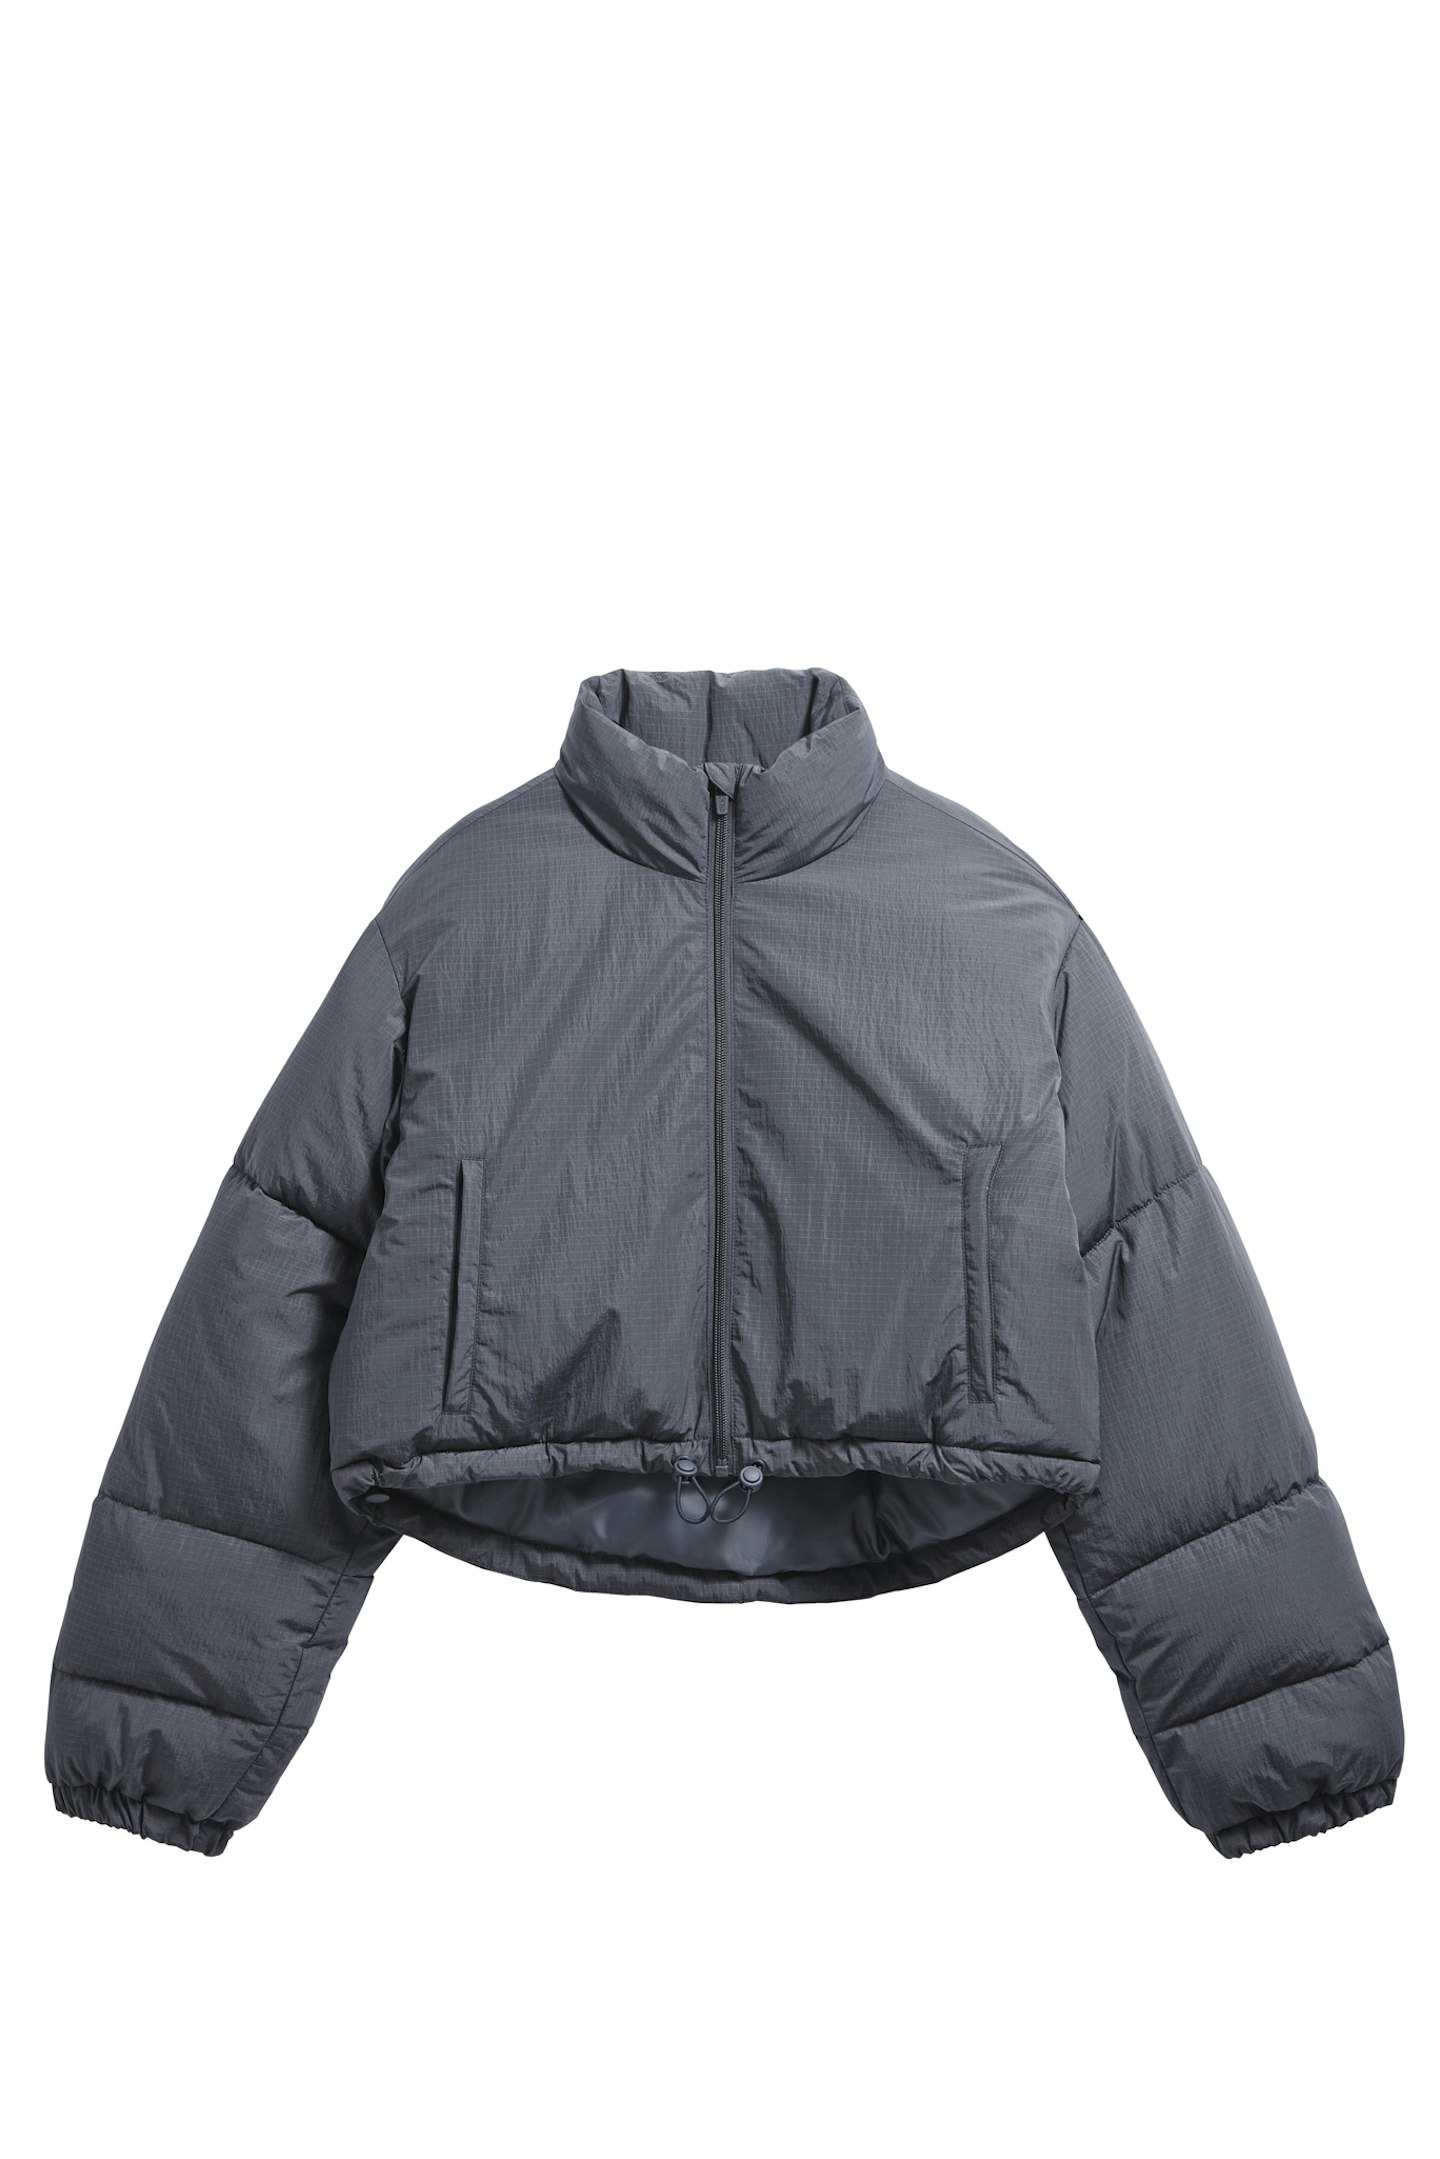 RAYE x H&M Move, Water-Repellent Cropped Puffer Jacket